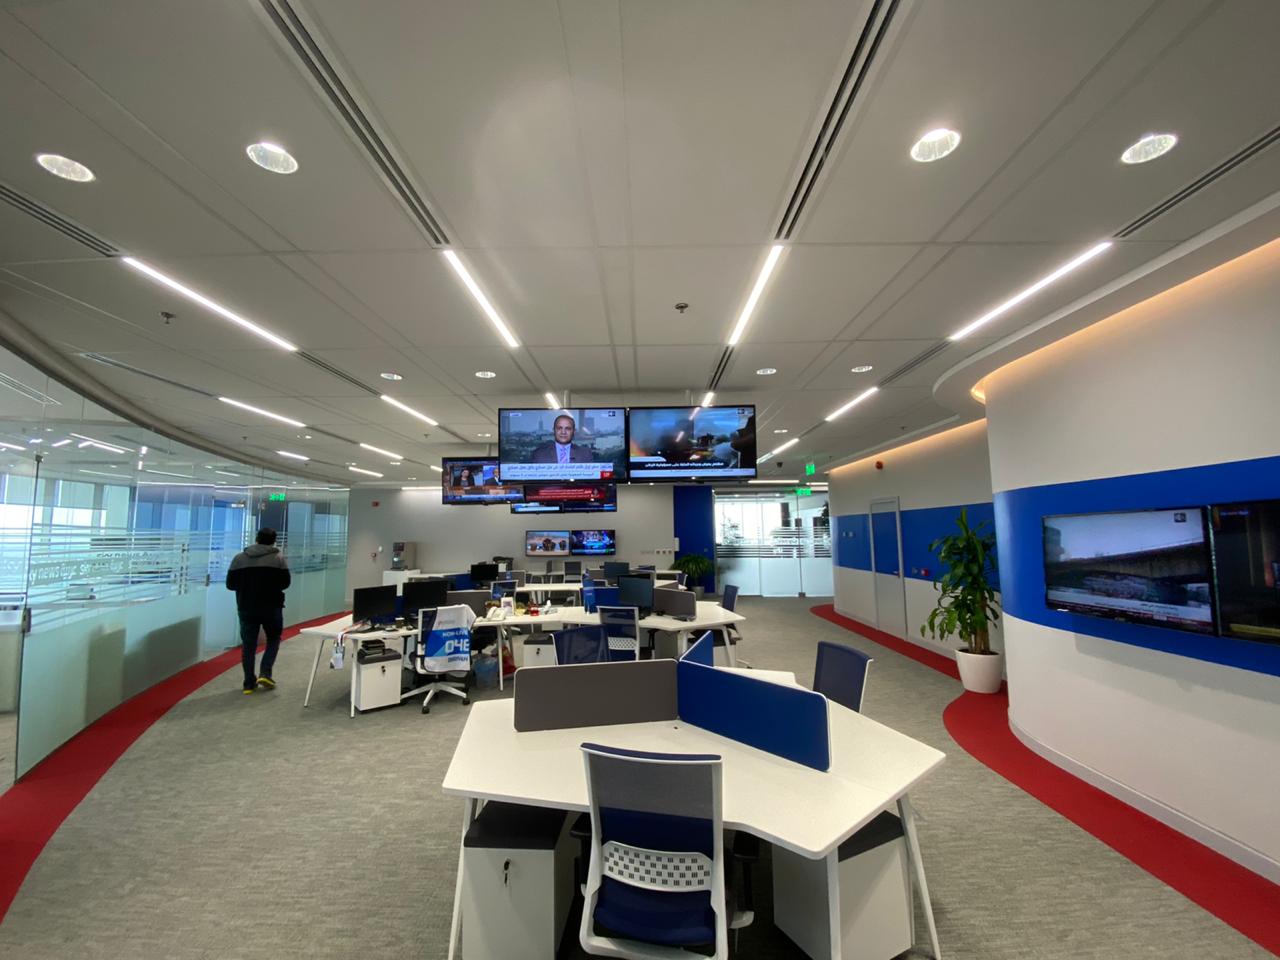 Turnkey Project for Sky News Middle East by Atelier 21 KSA